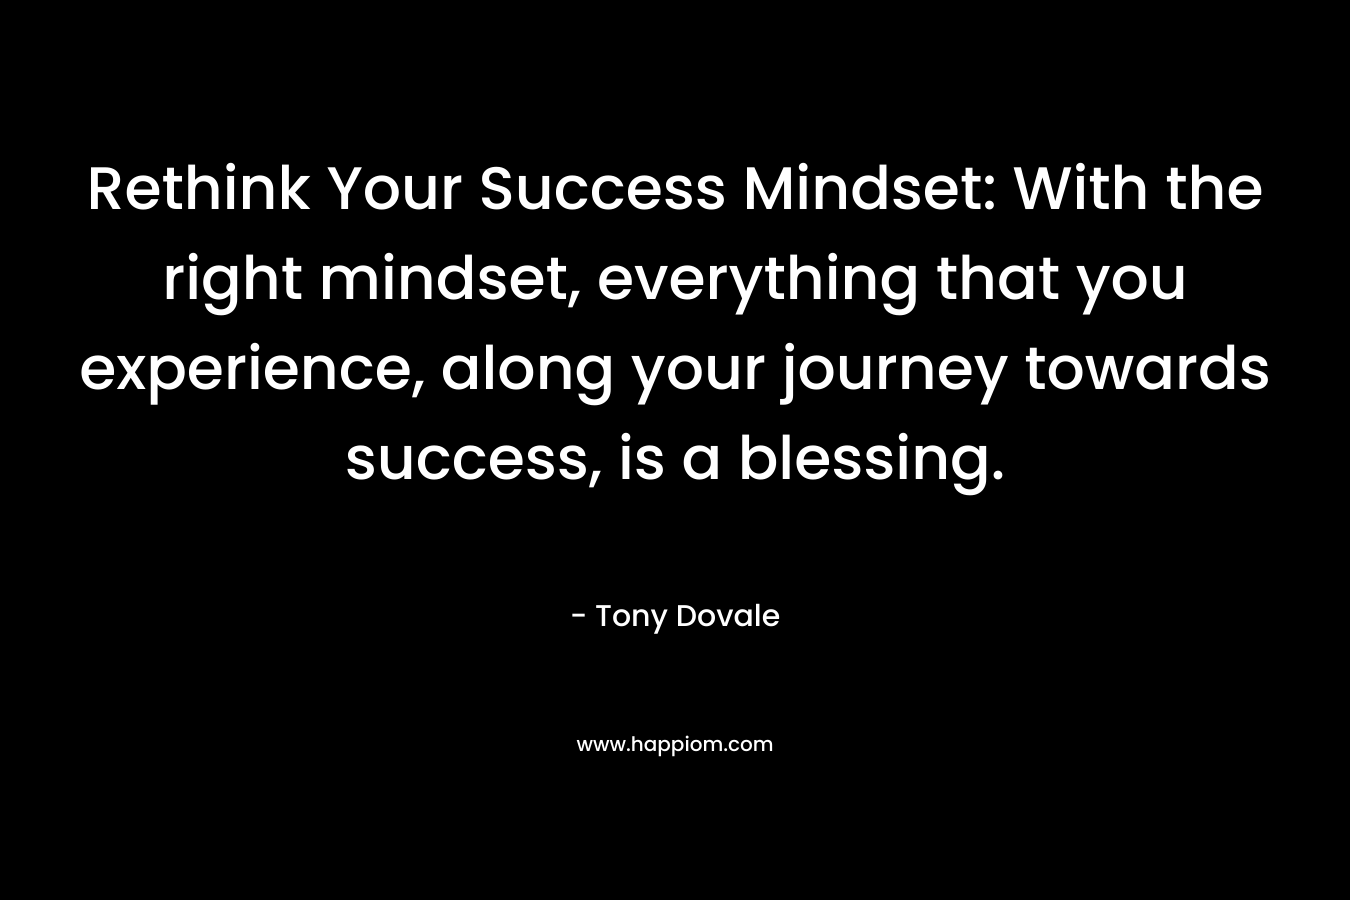 Rethink Your Success Mindset: With the right mindset, everything that you experience, along your journey towards success, is a blessing.